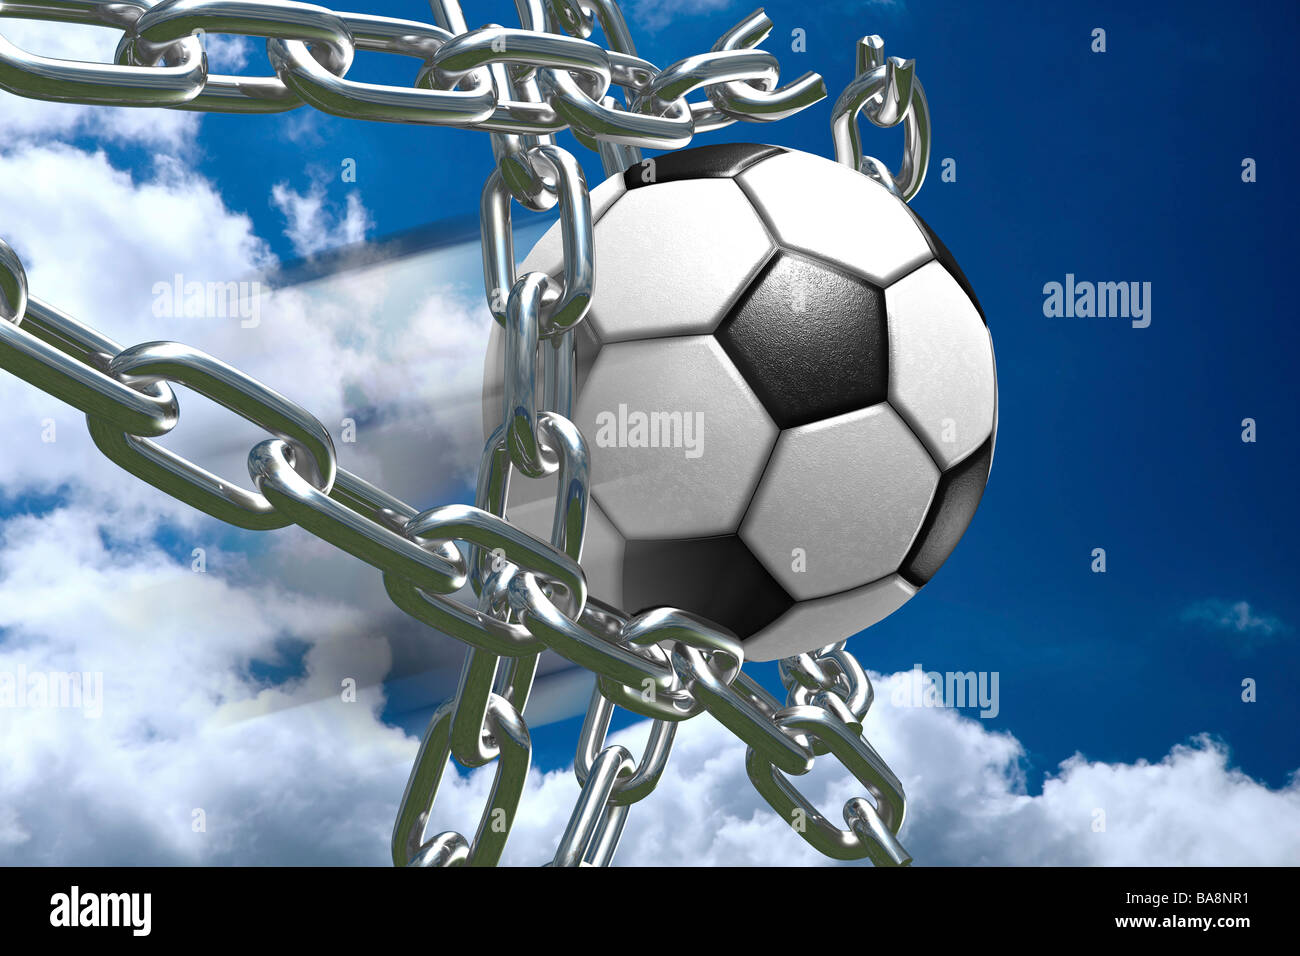 Man breaking free from ball and chain, illustration - Stock Image -  C039/7920 - Science Photo Library